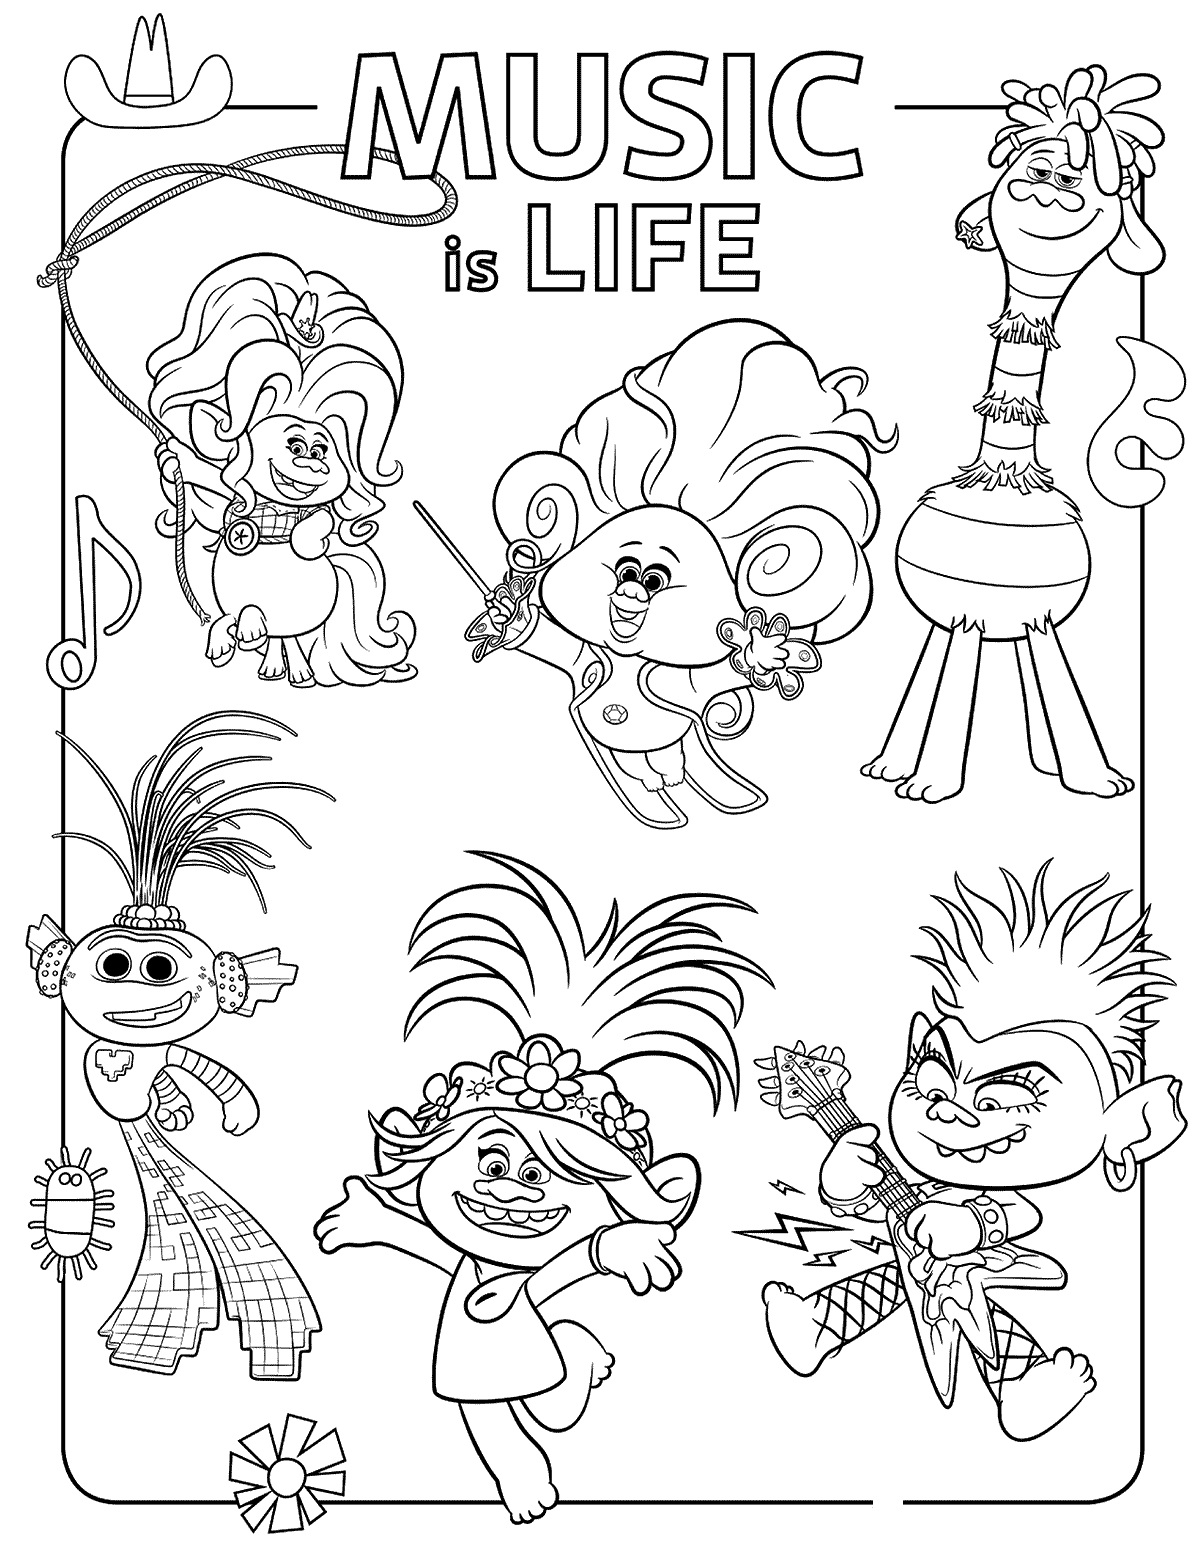 trolls-world-tour-coloring-pages-youloveit